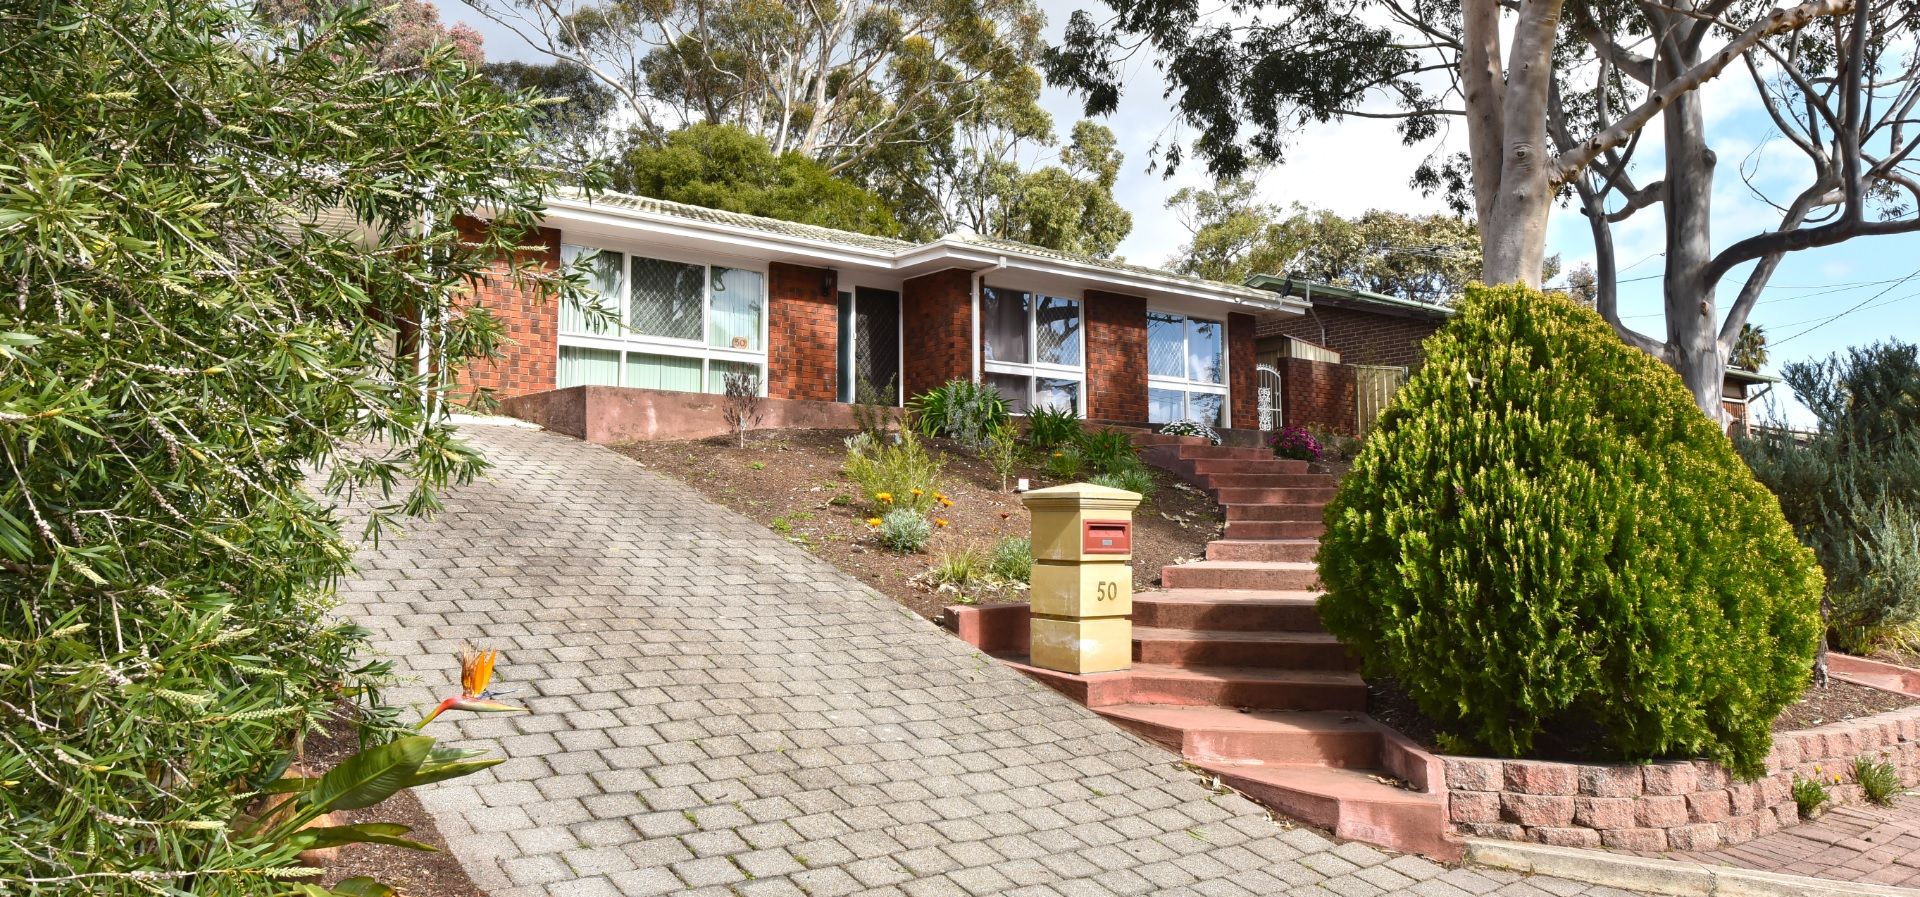 50 Booth Street, Happy Valley SA 5159, Image 0